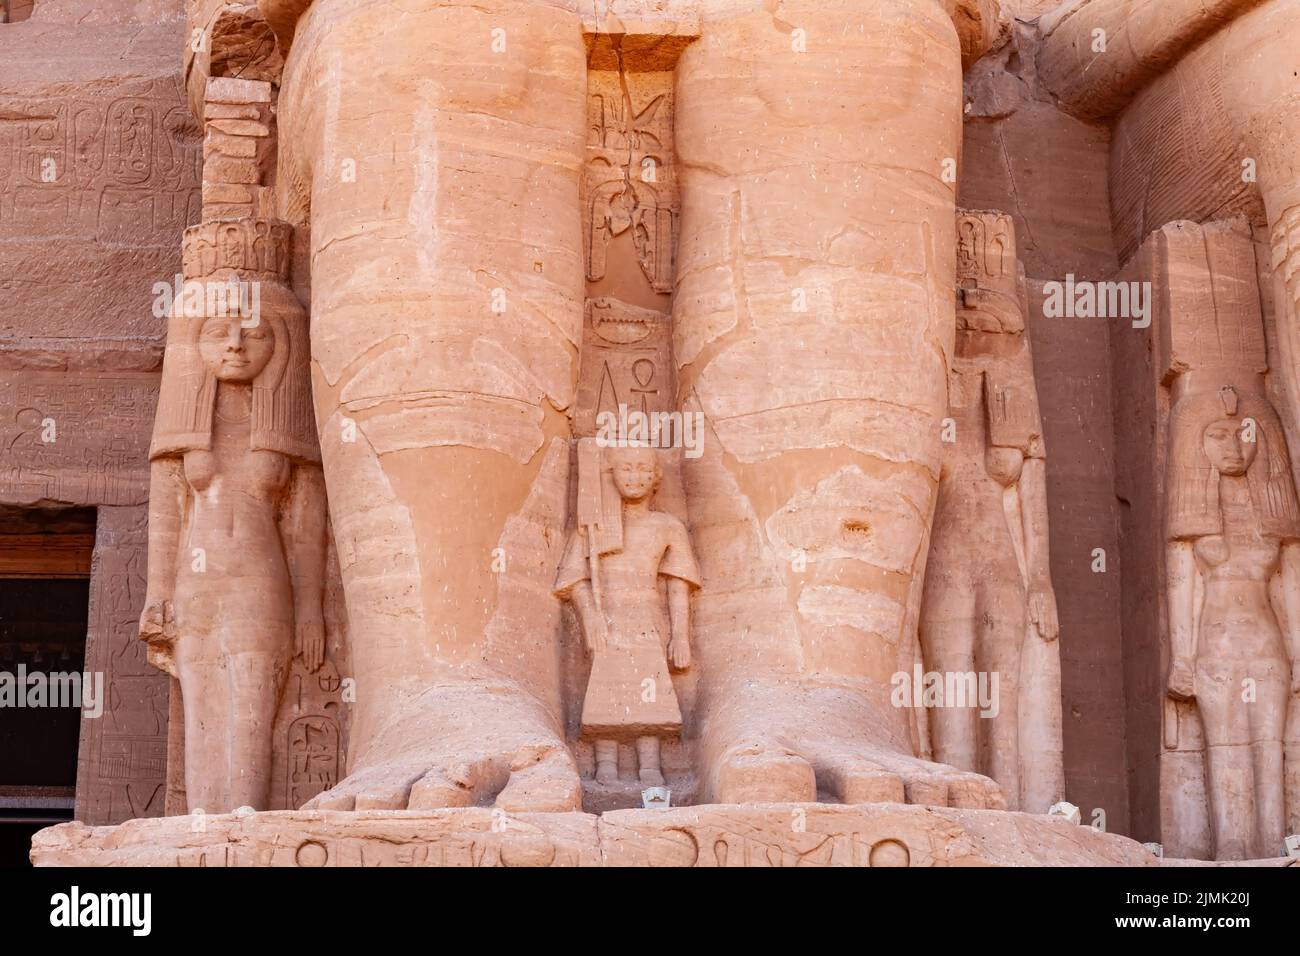 View of the leg part of the Seated Ramses II at The Great Temple of Ramses II in Abu Simbel. Stock Photo